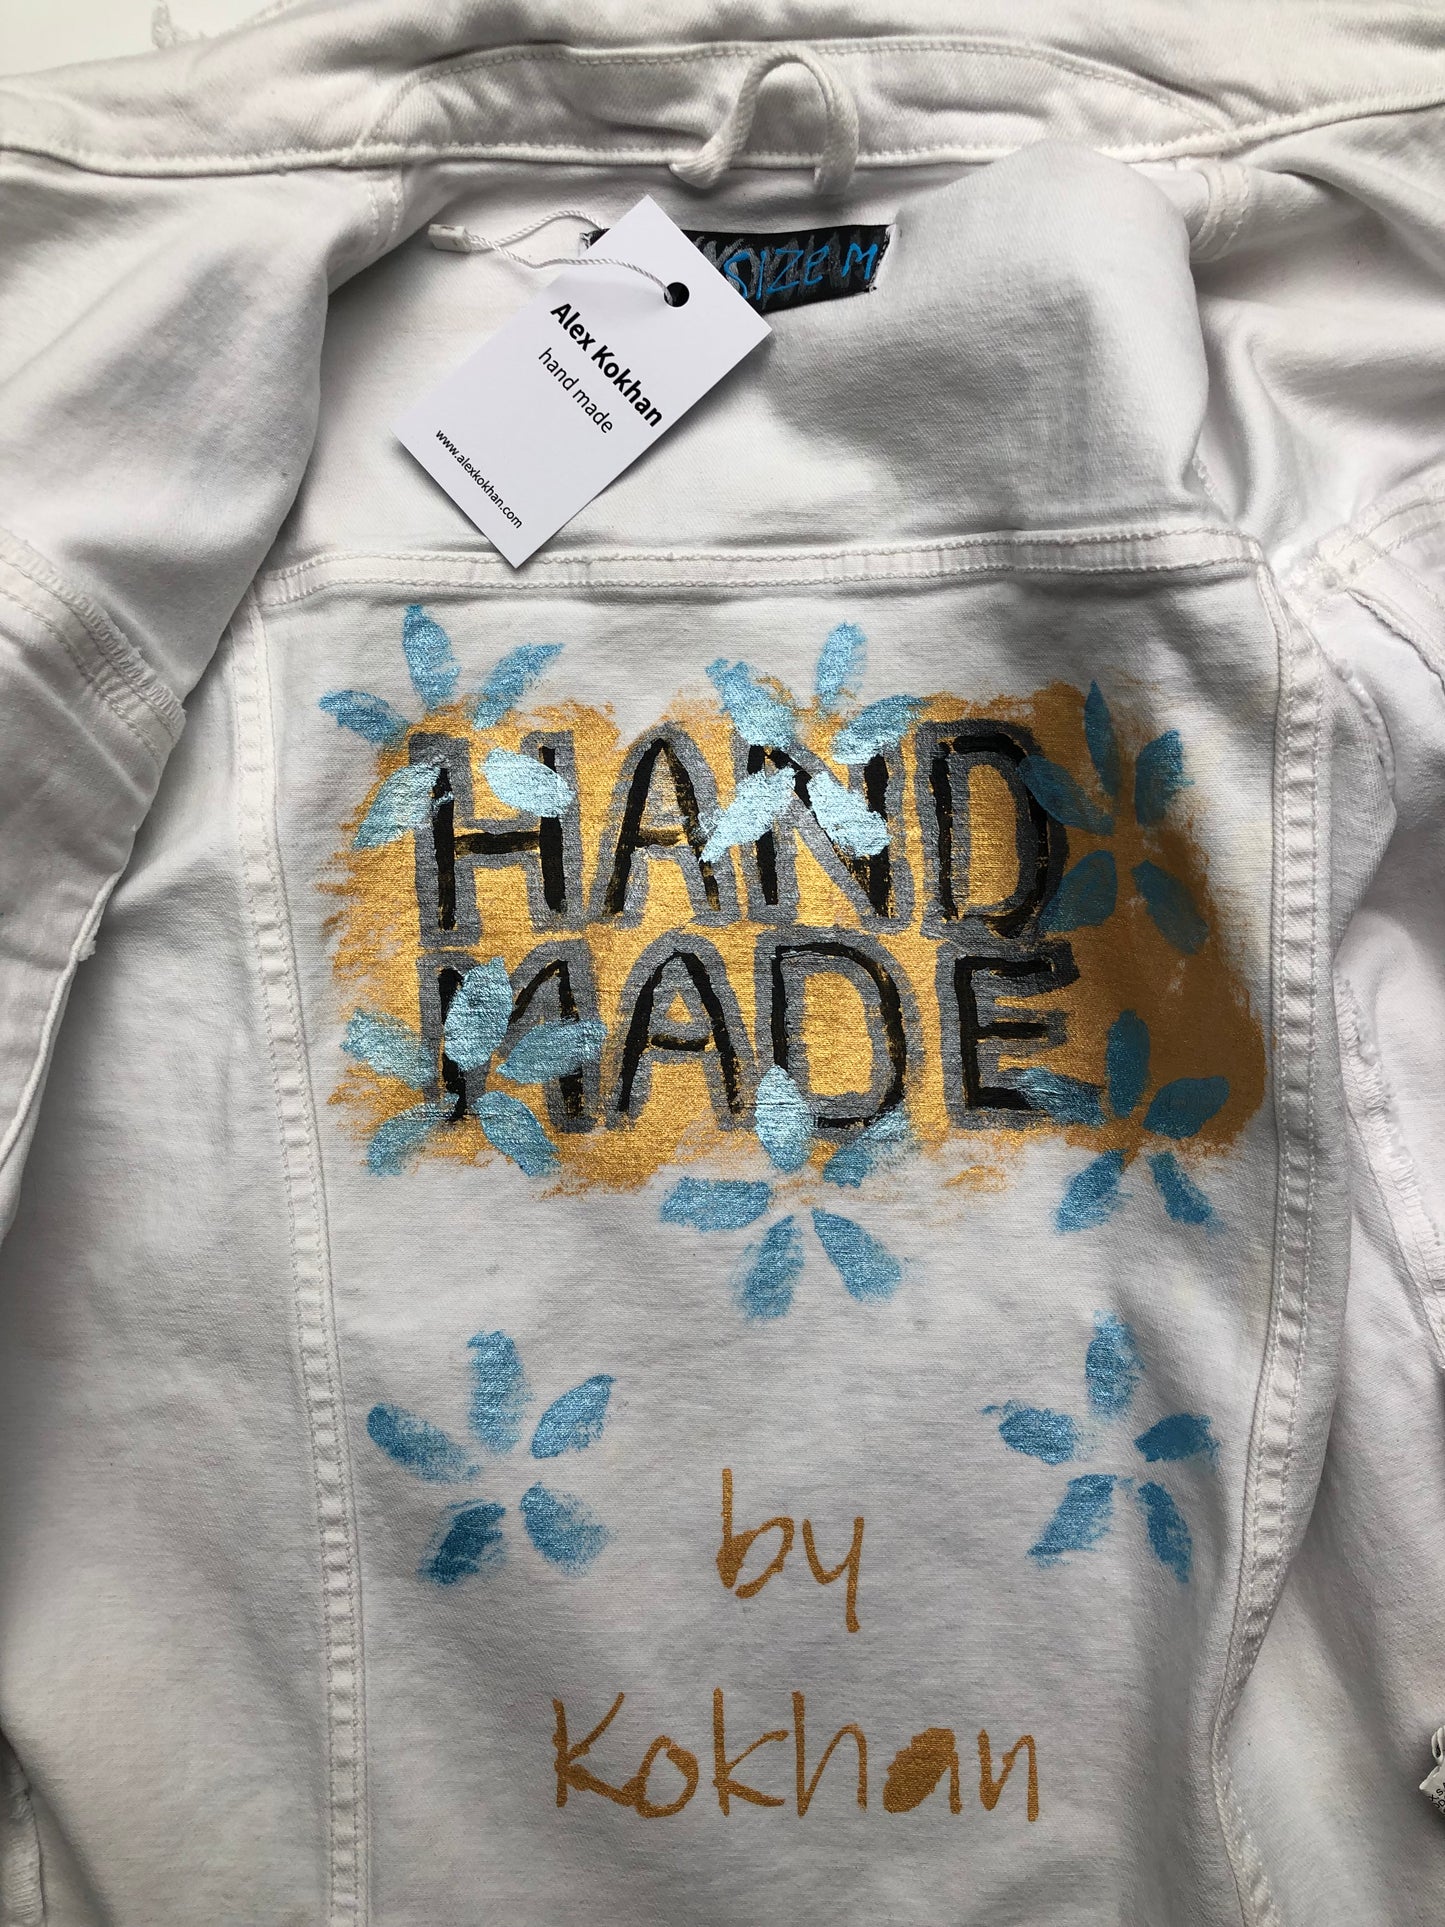 Painting on the inside of a women's denim jacket